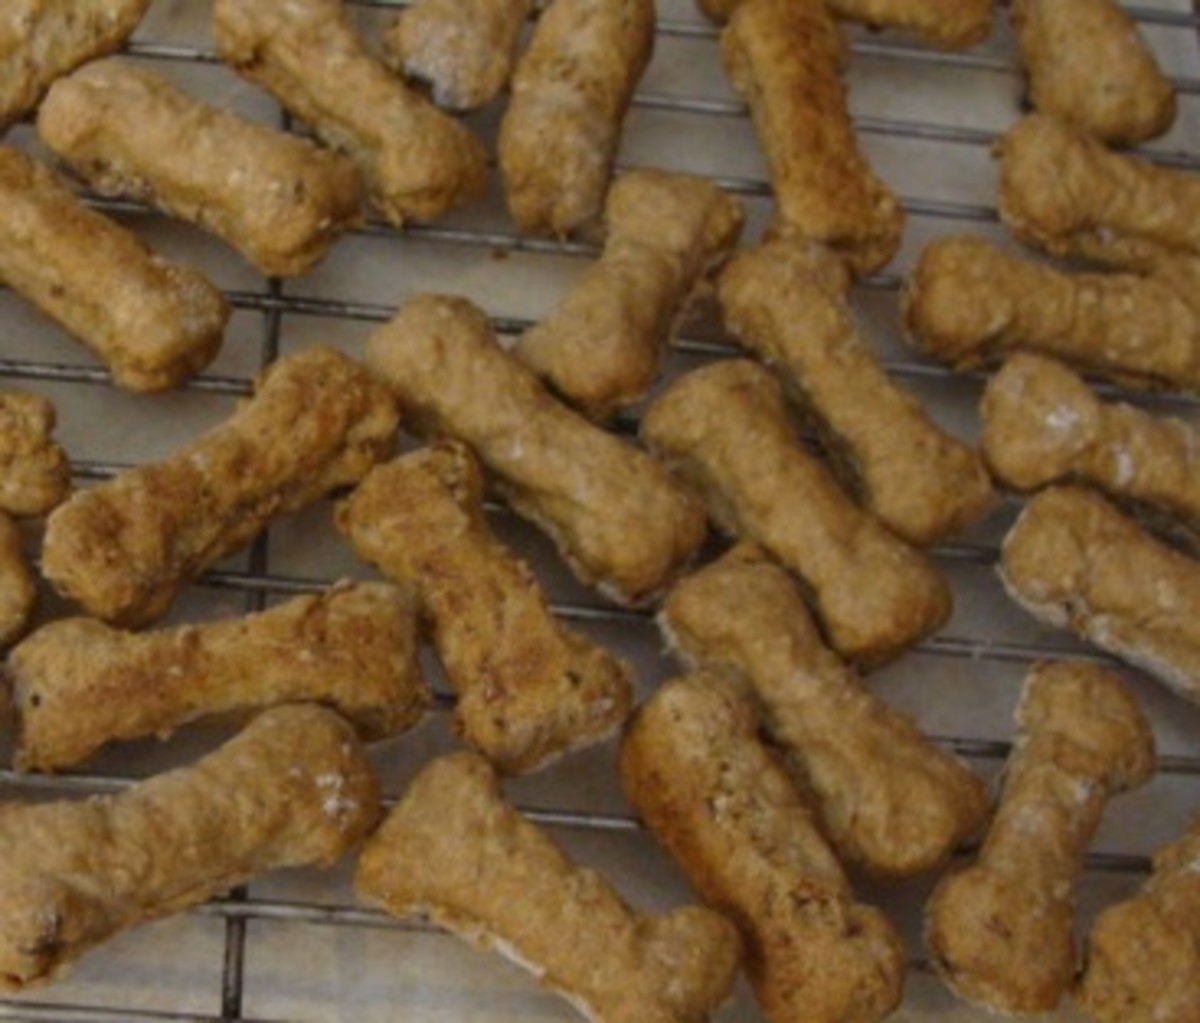 Cool your finished dog treats completely before storing.